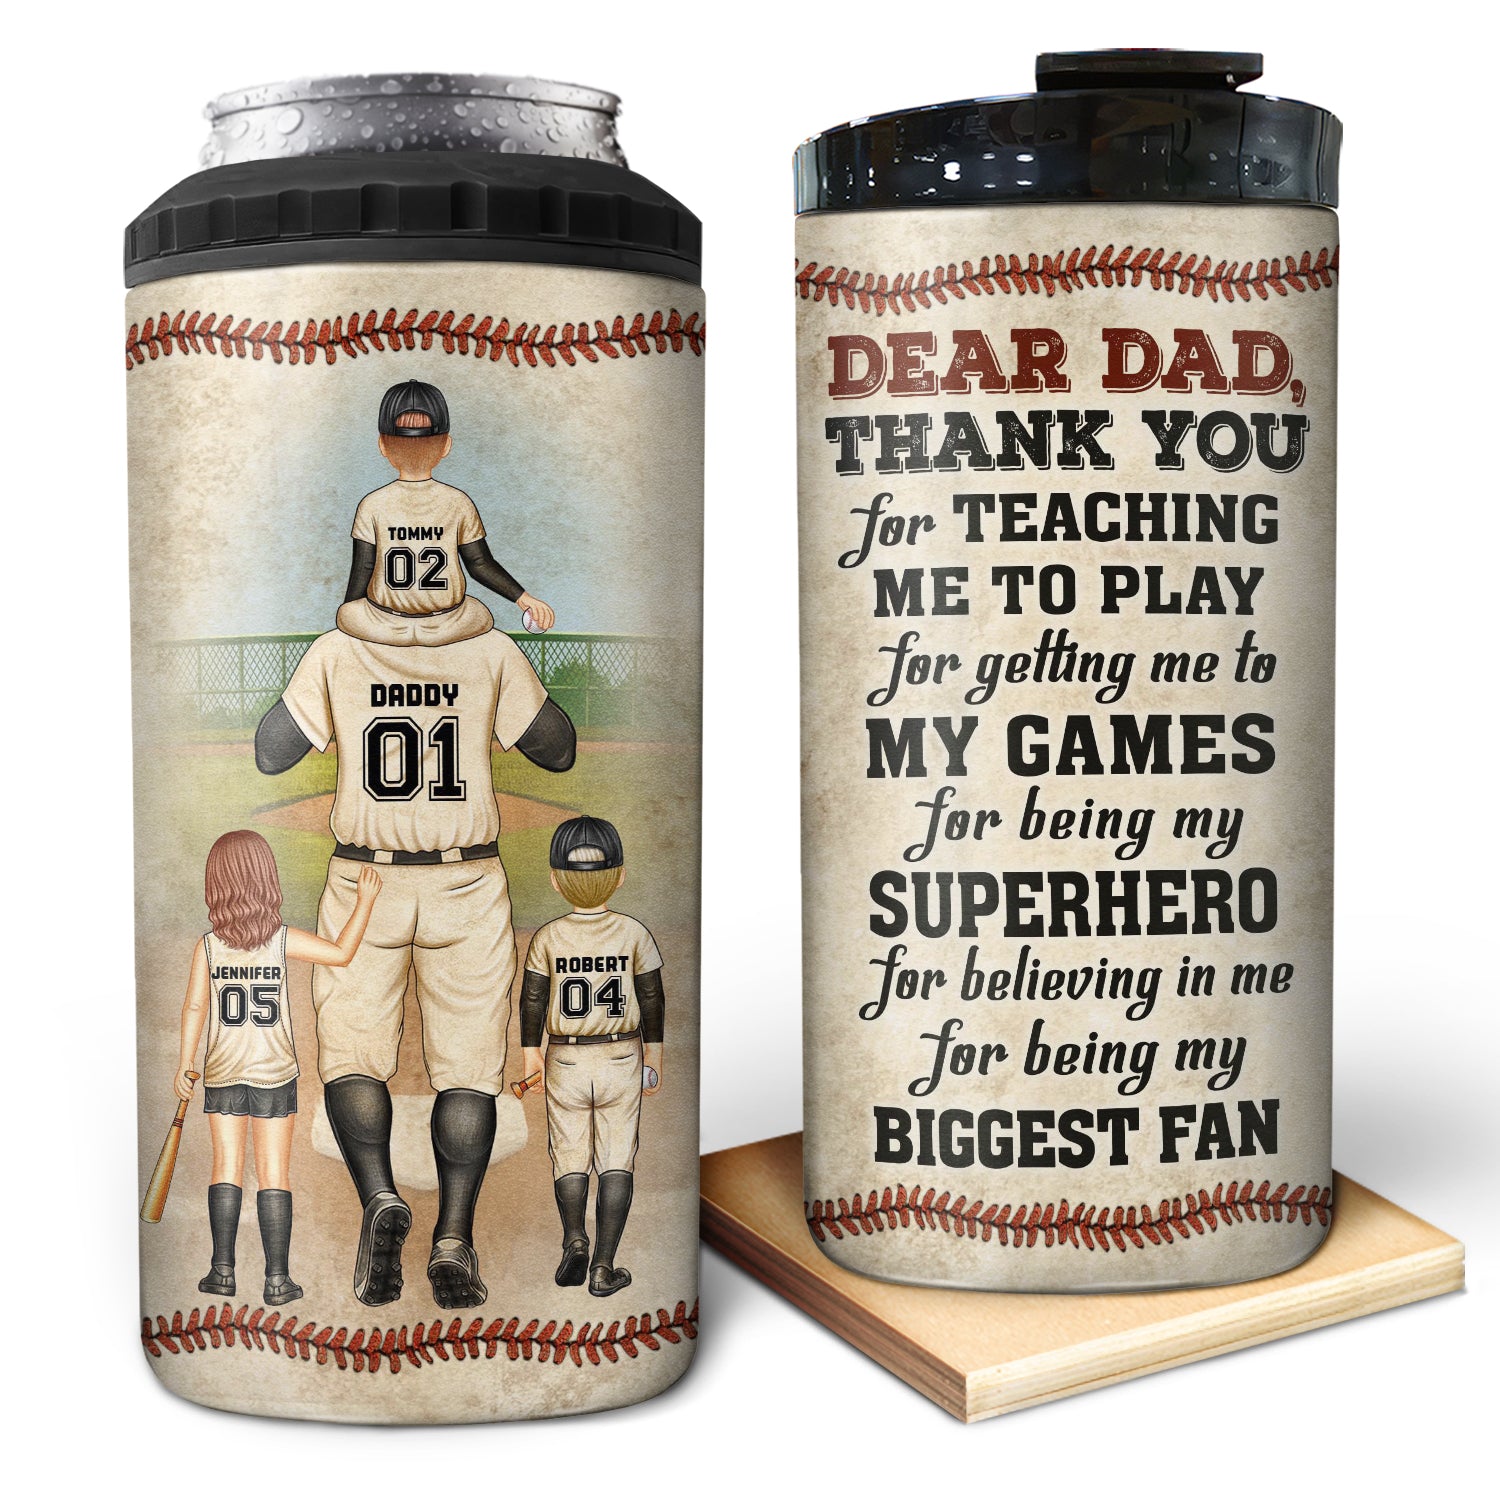 Dear Dad Thank You For Teaching Me - Gift For Father, Baseball Fans, Softball - Personalized Custom 4 In 1 Can Cooler Tumbler